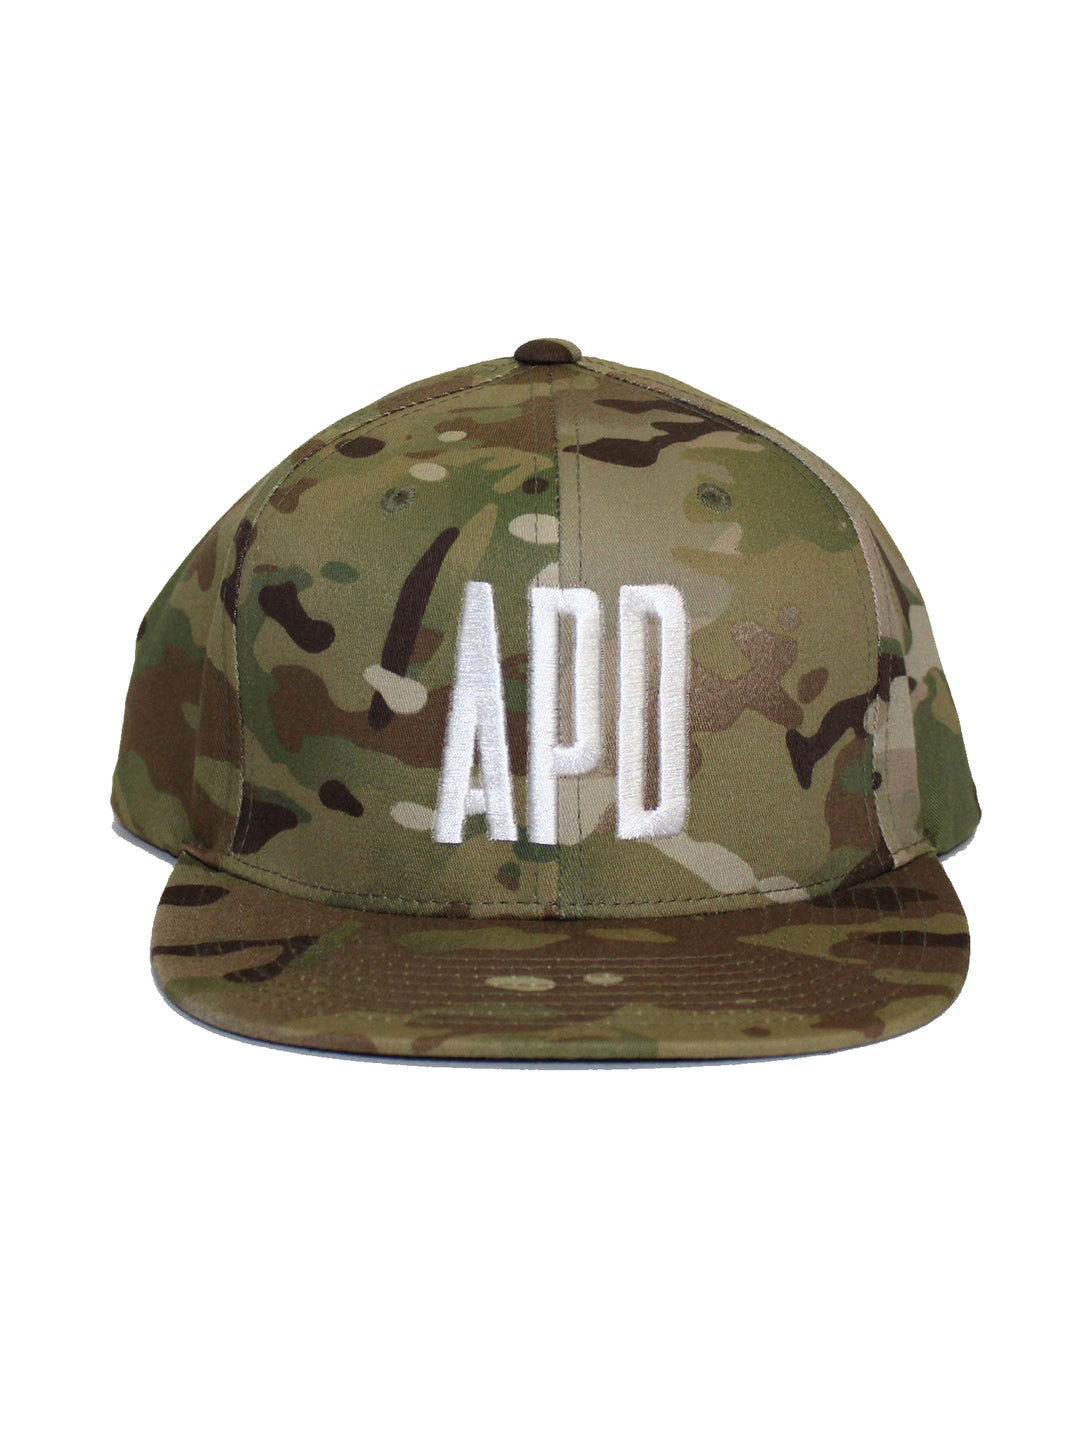 Multicam®Snapback (more colors available)